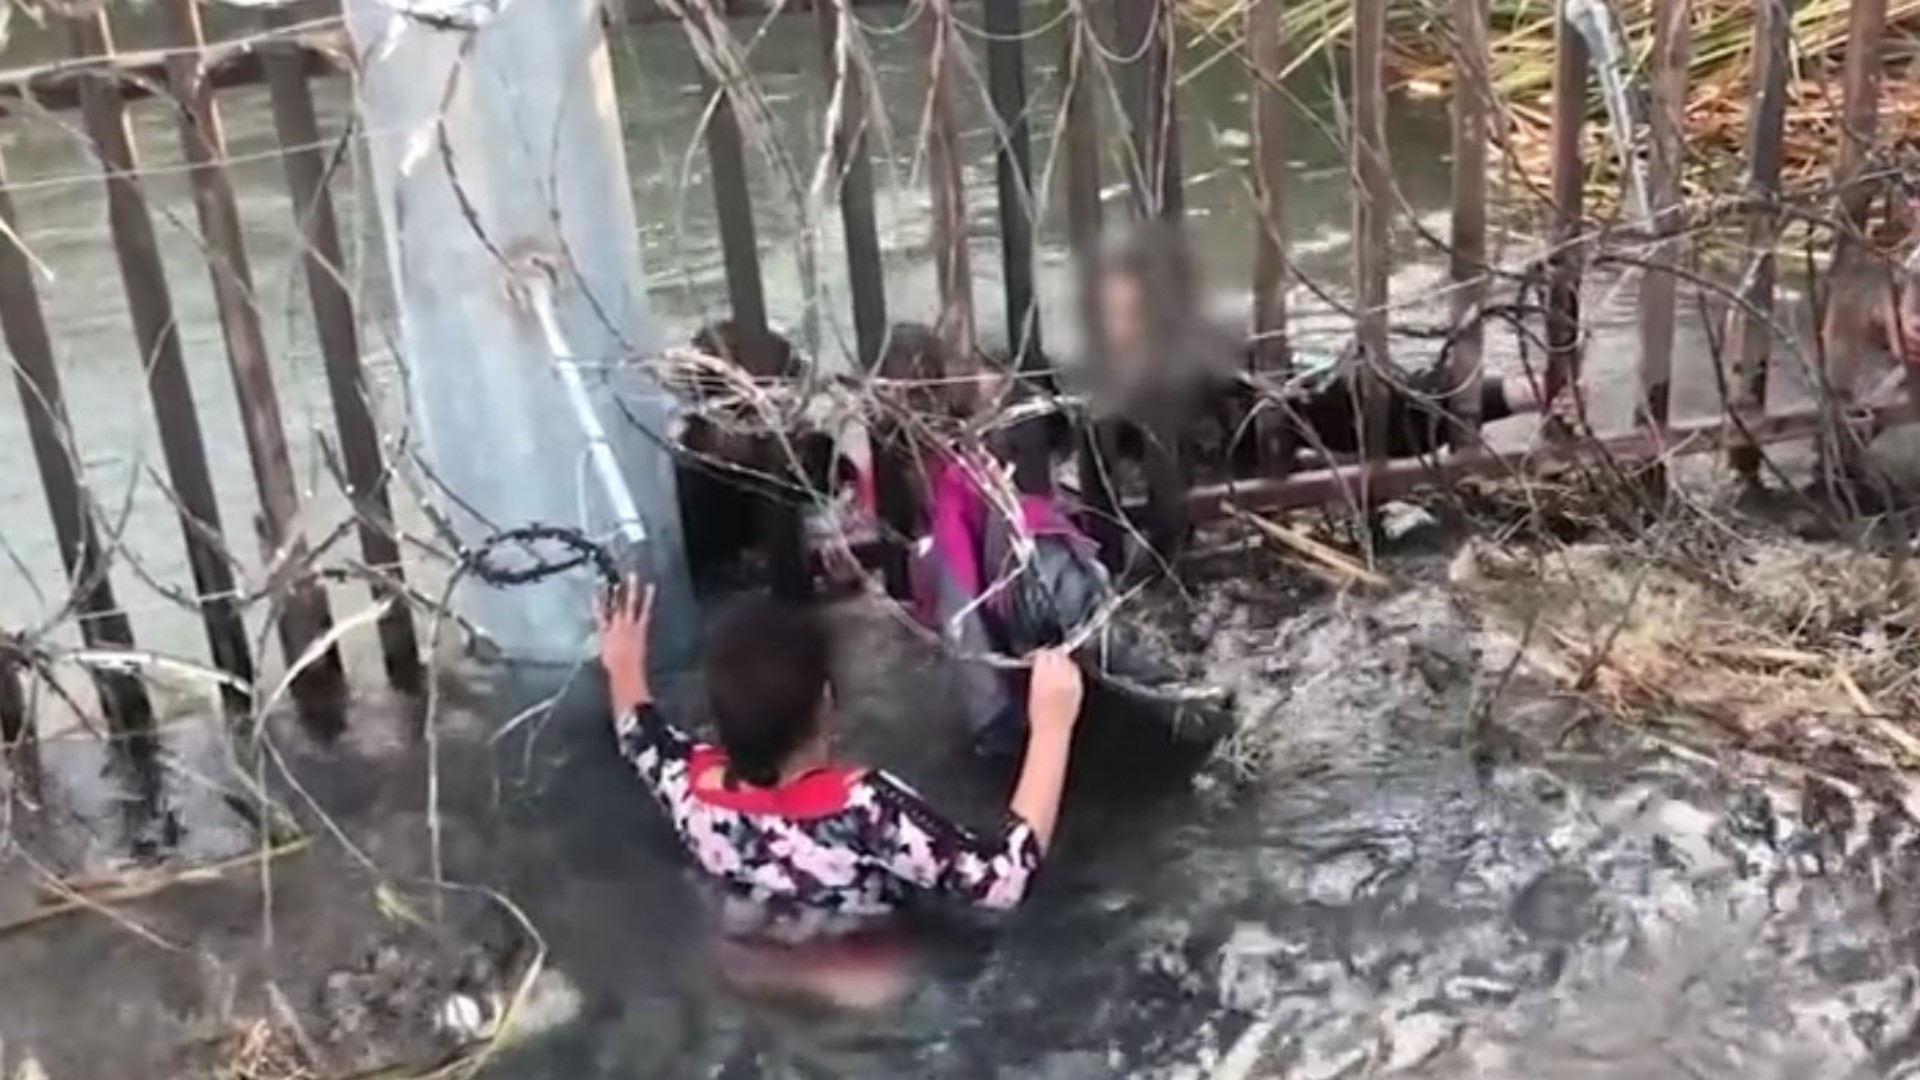 U.S. Customs and Border Protection released two videos showing how dramatic and dangerous migrant crossings into the U.S. can be when involving small children.